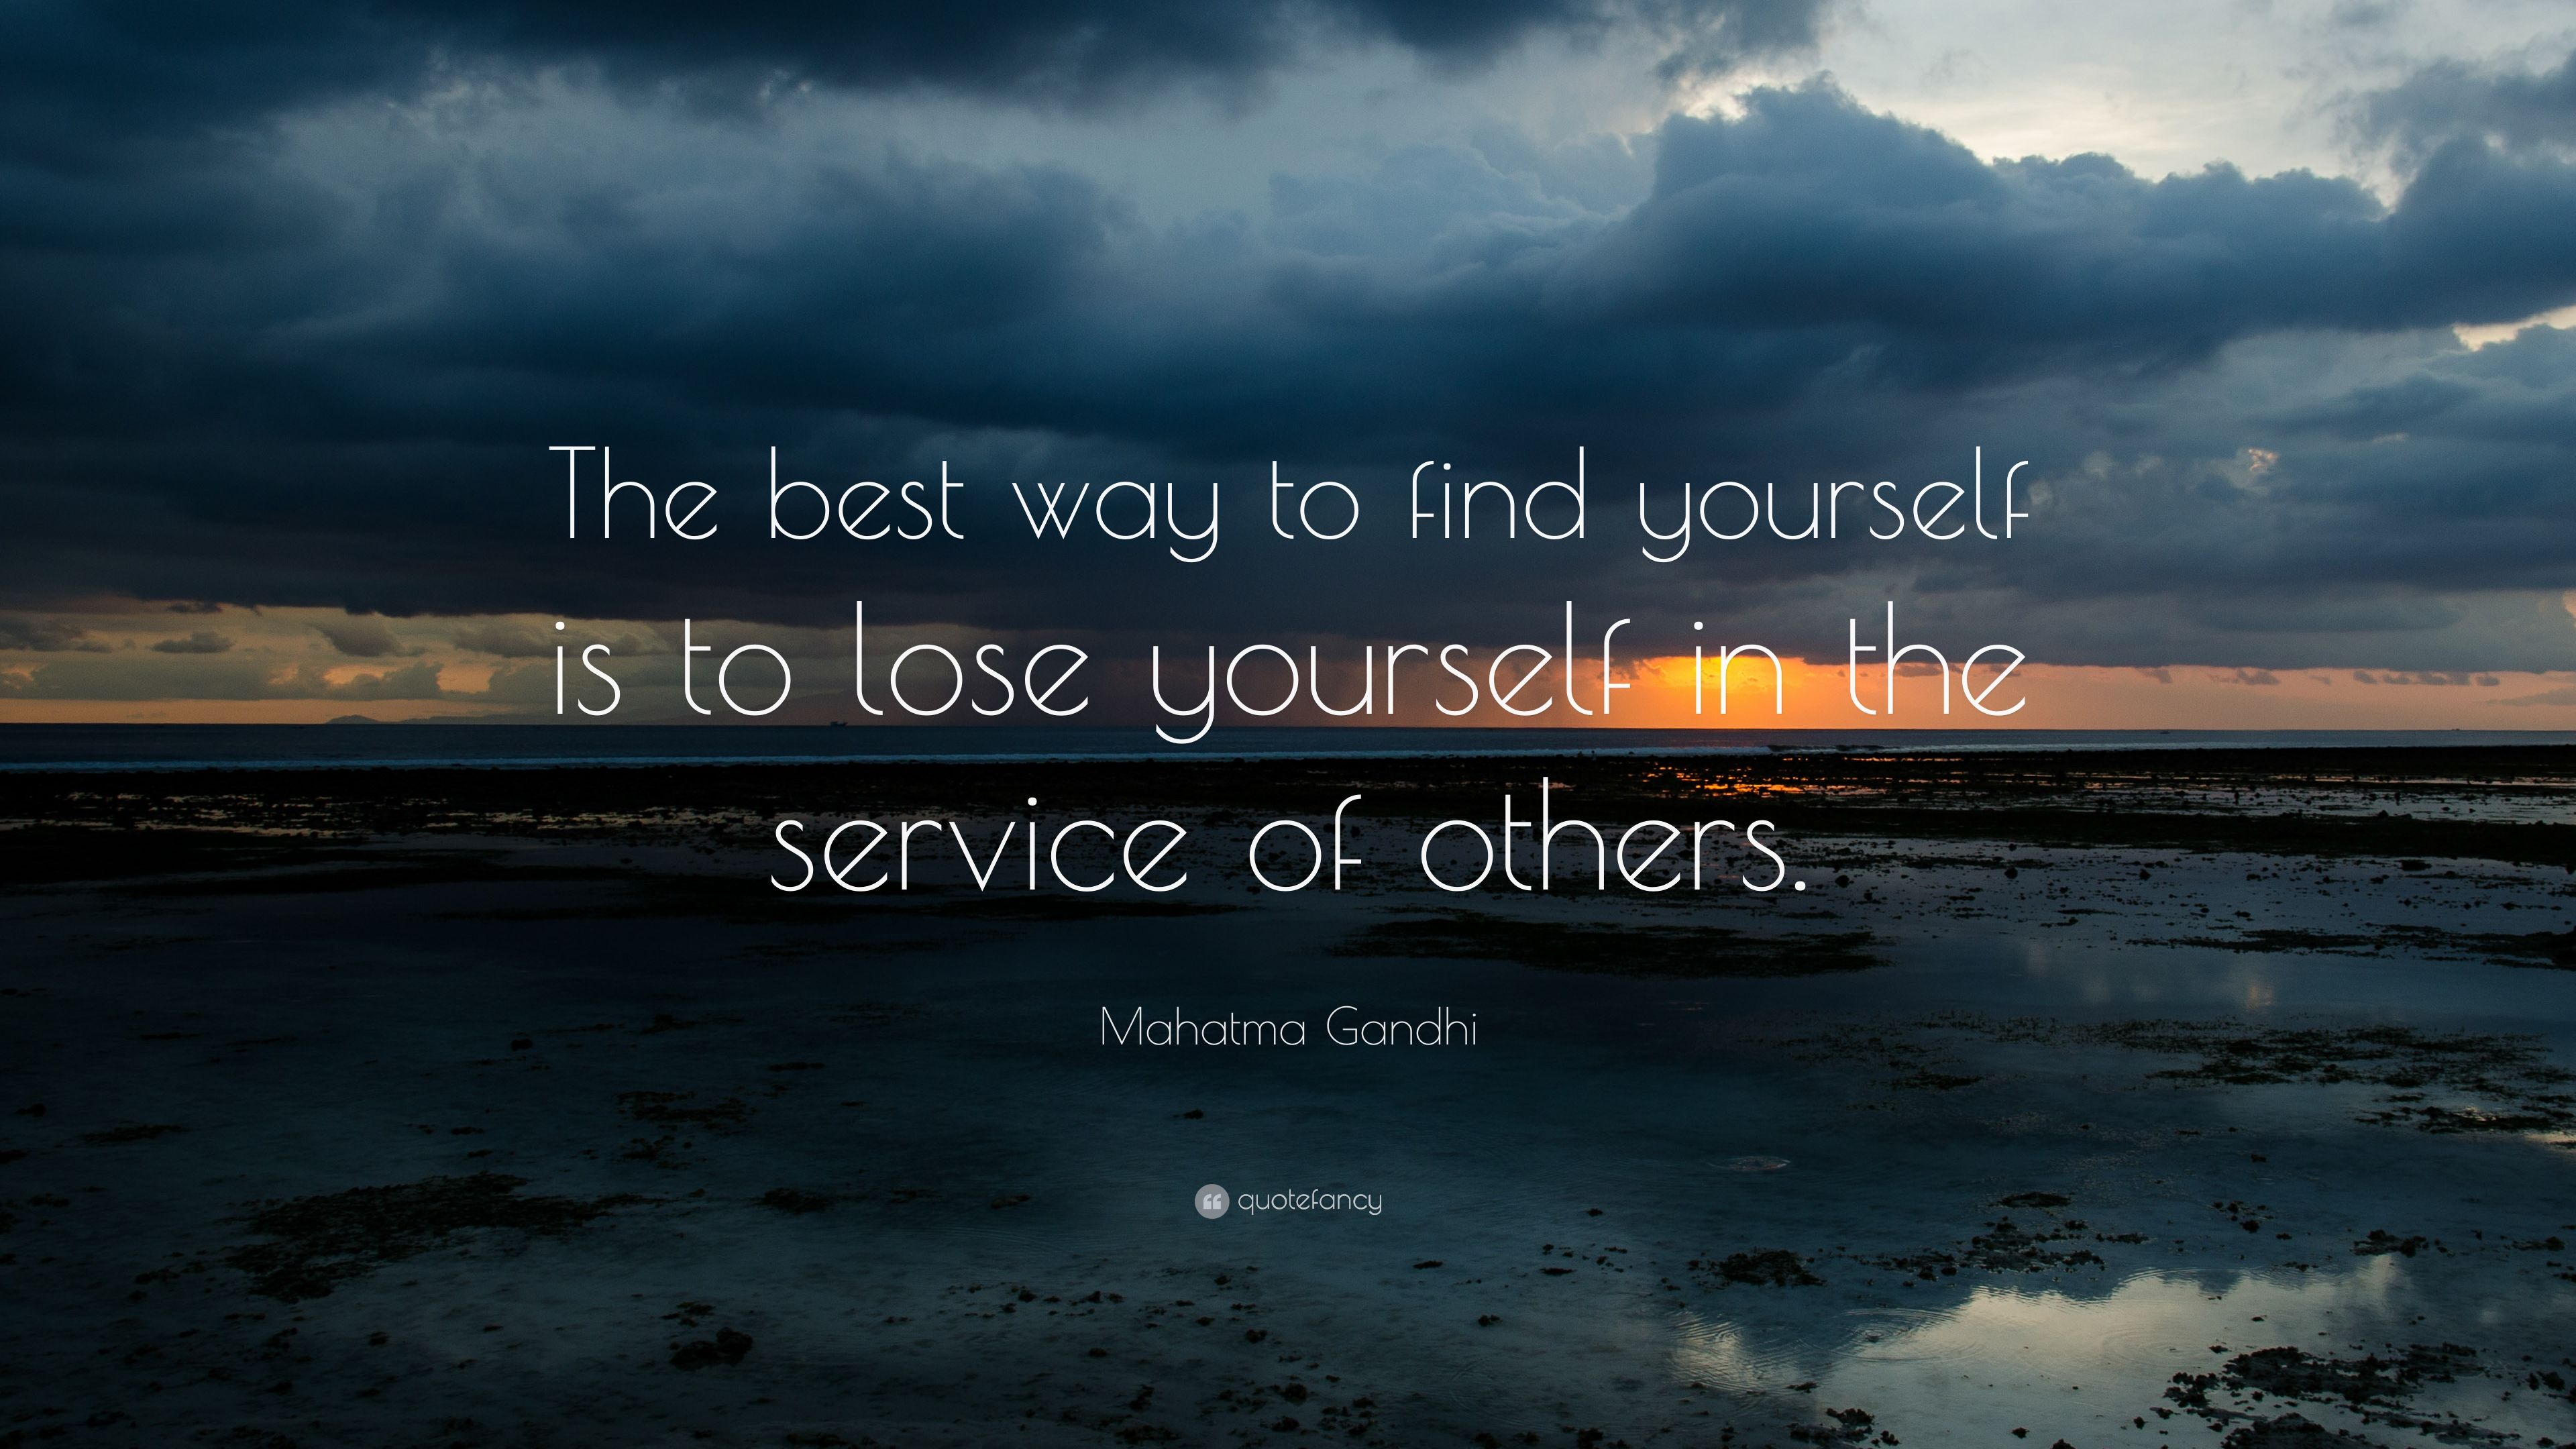 Mahatma Gandhi Quote: “The best way to find yourself is to lose